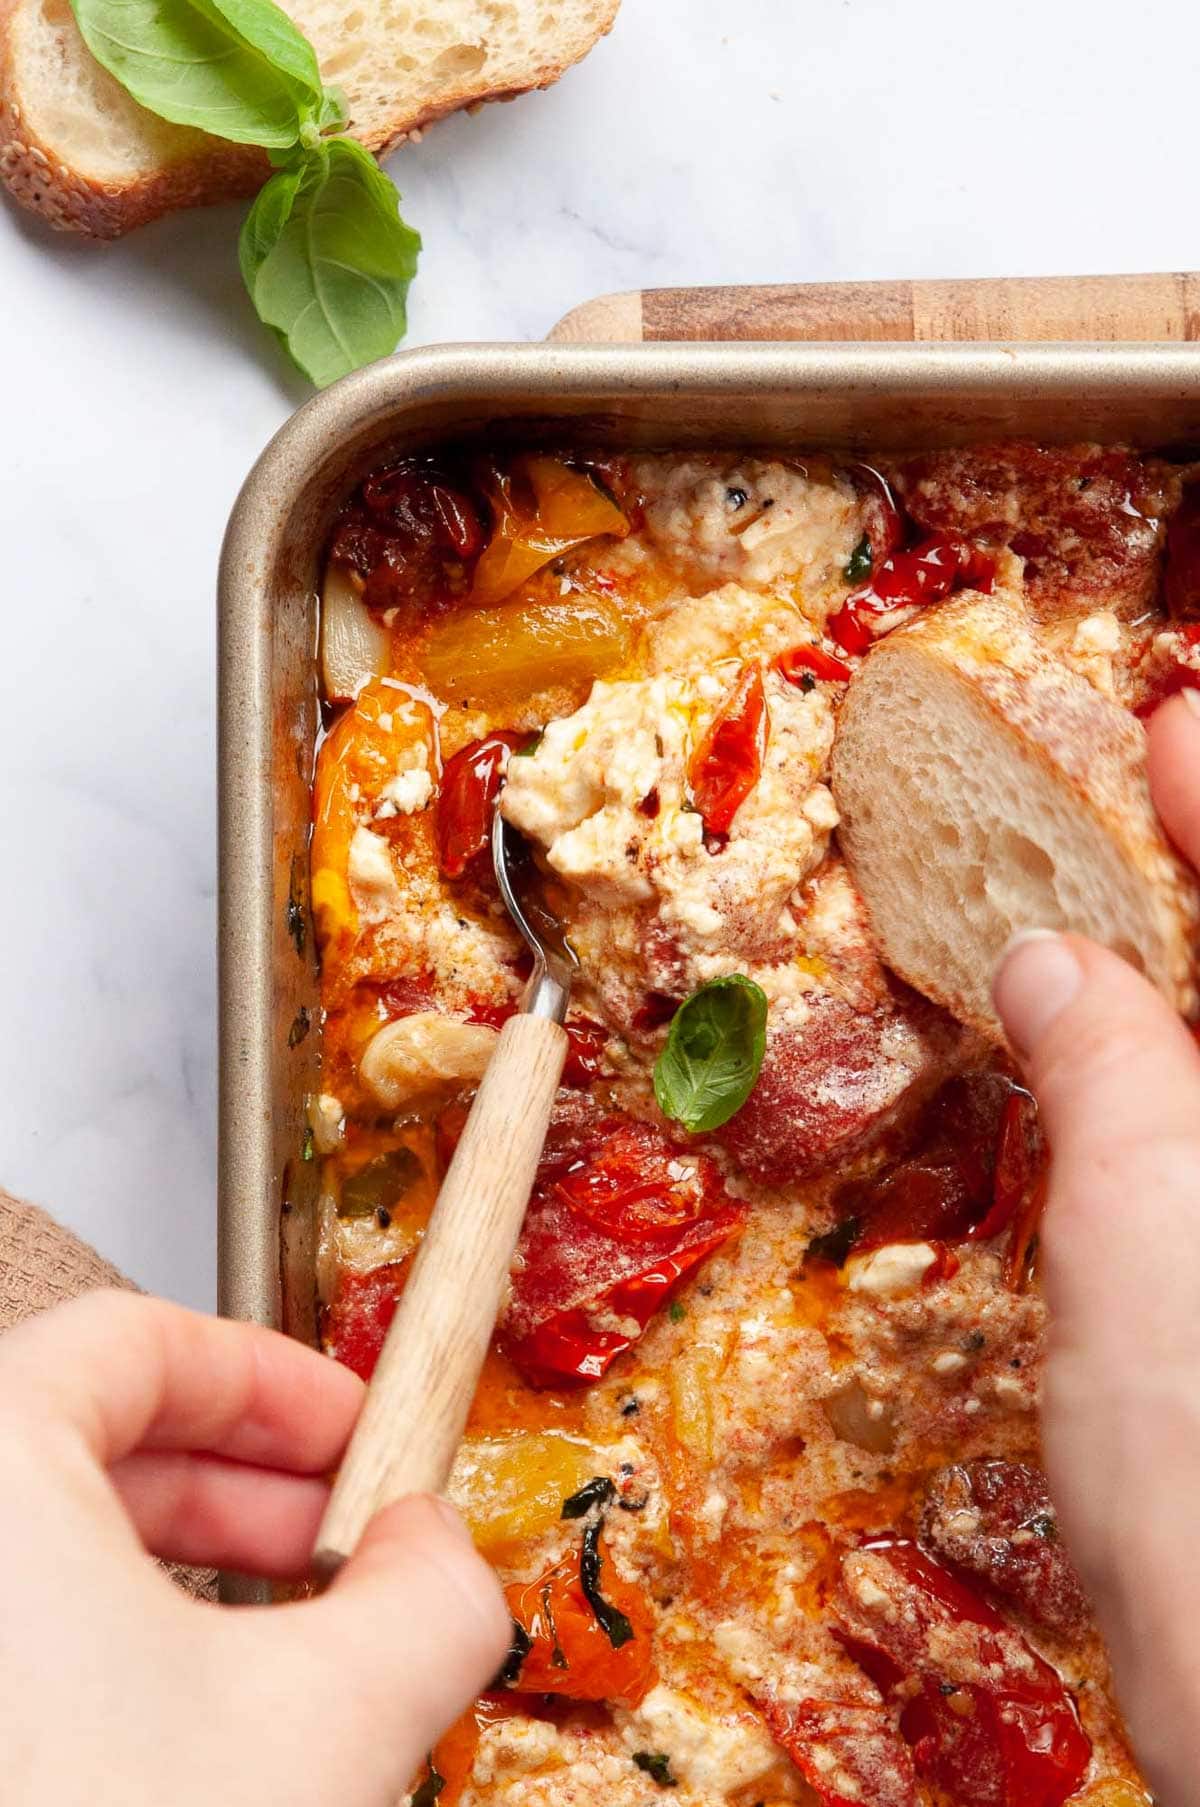 Person spooning some baked tomato feta dip on a slice of a baguette.